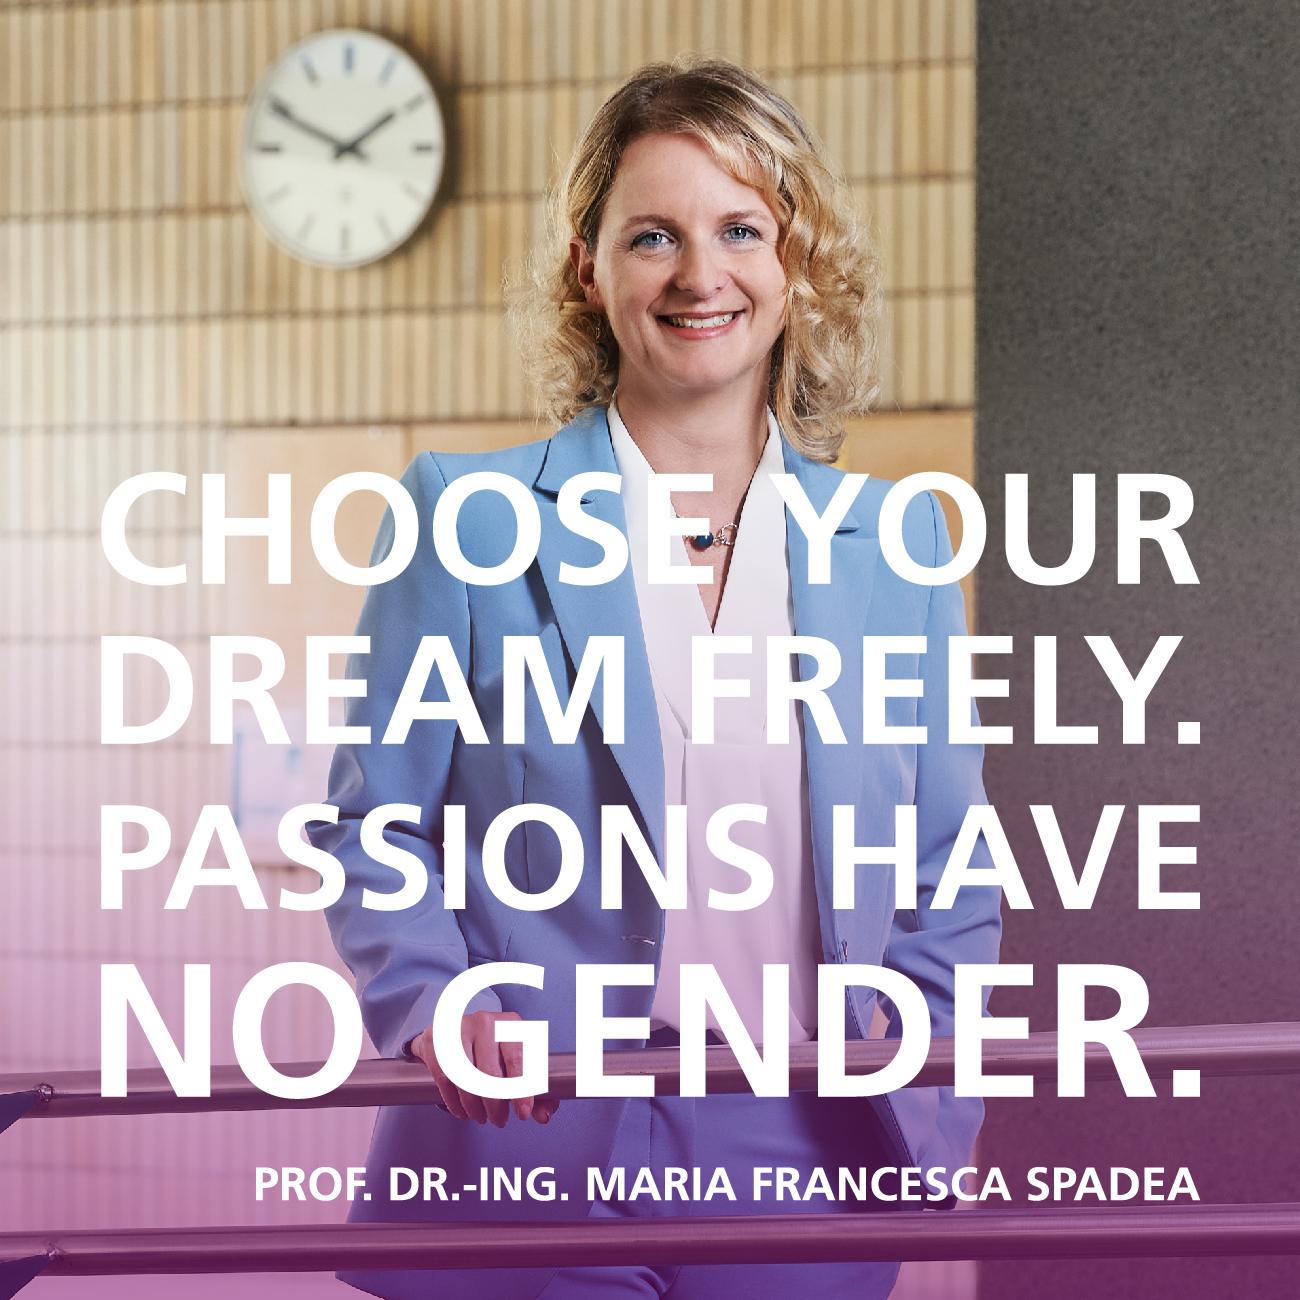 Choose your dream freely. Passions have no gender. Quote by  Prof. Dr.-Ing. Maria Francesca Spadea, Division 3, KIT